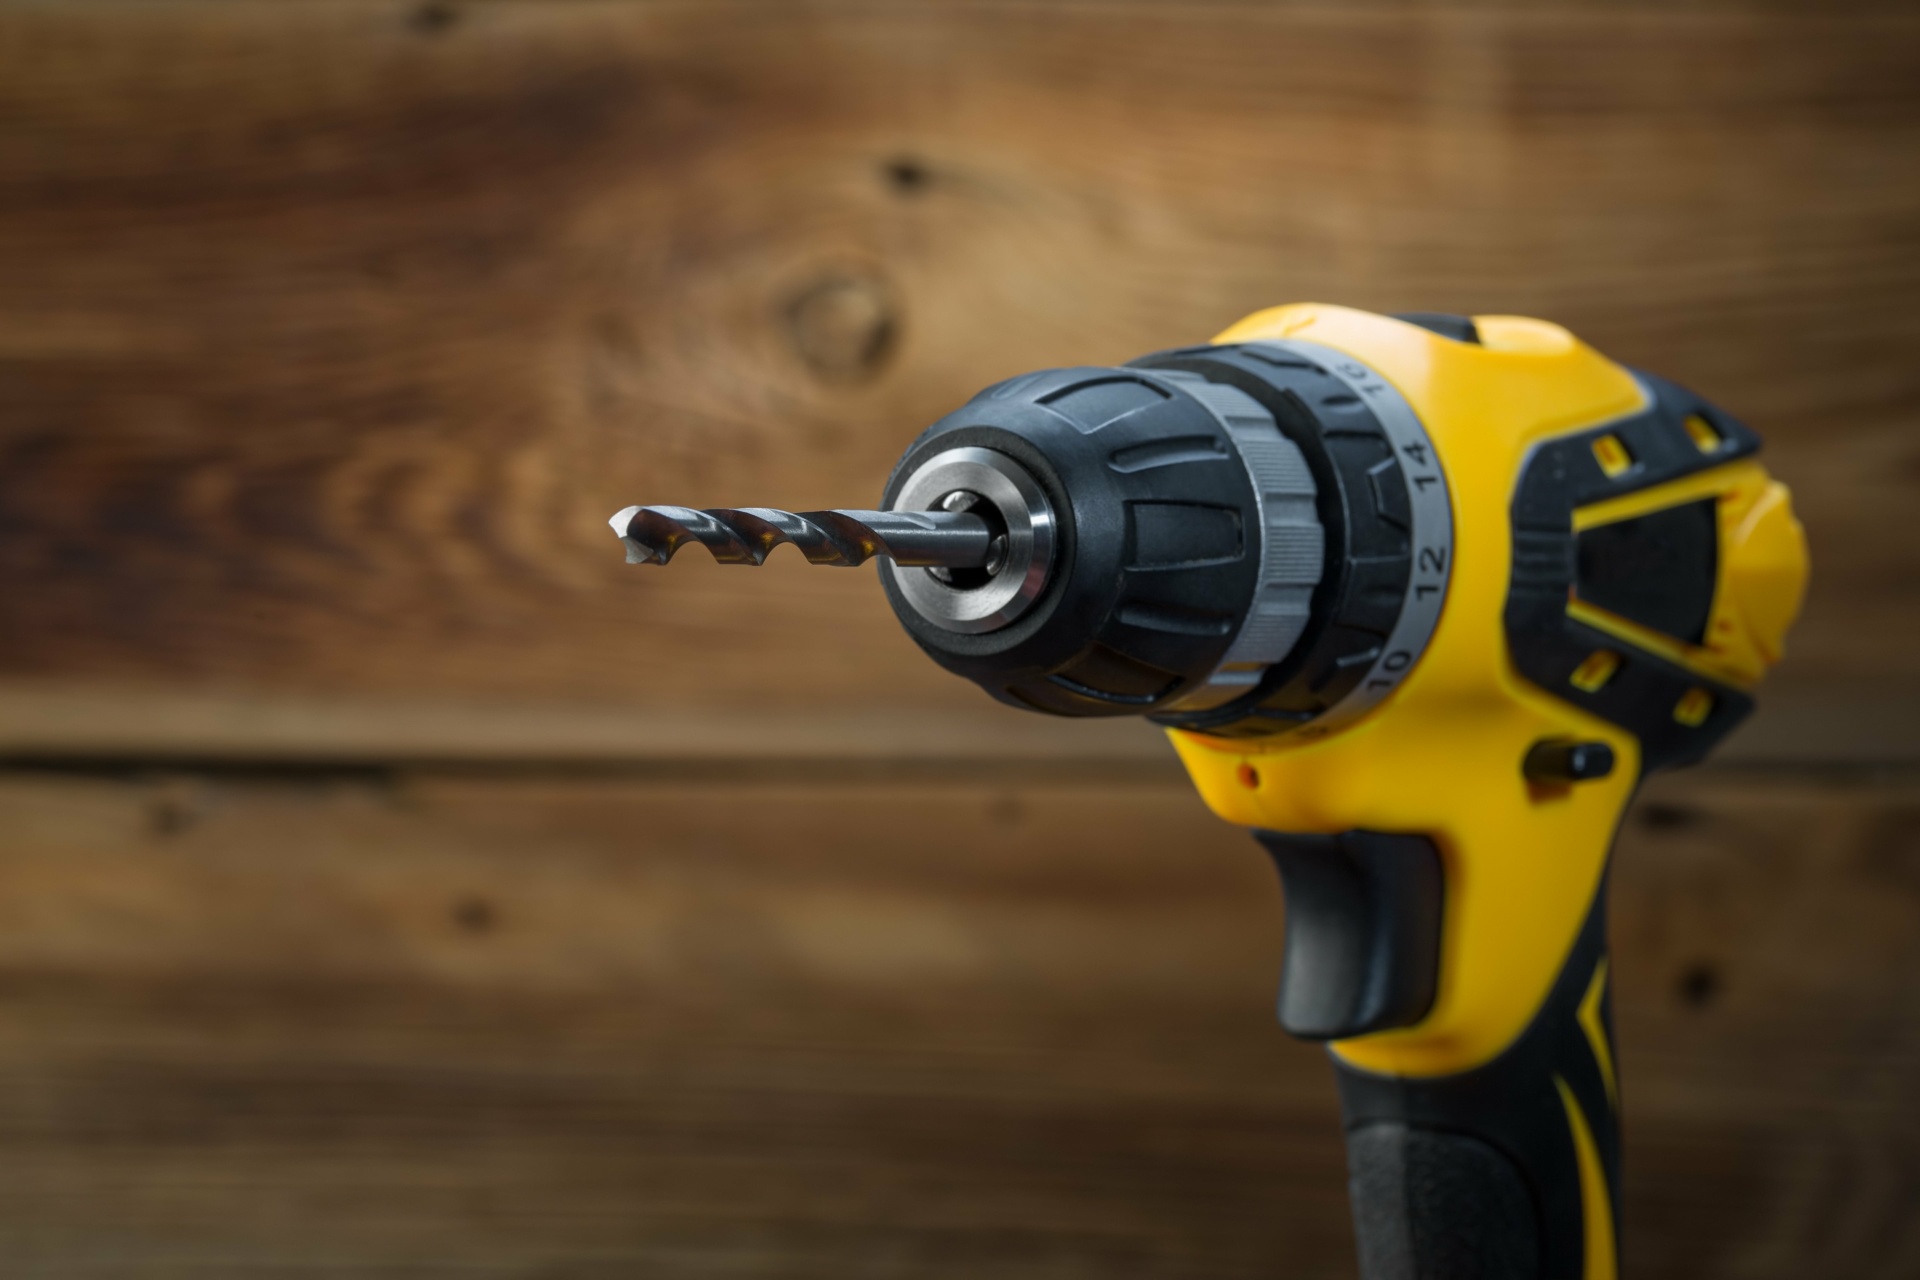  Power drills are one type of woodworking tool.